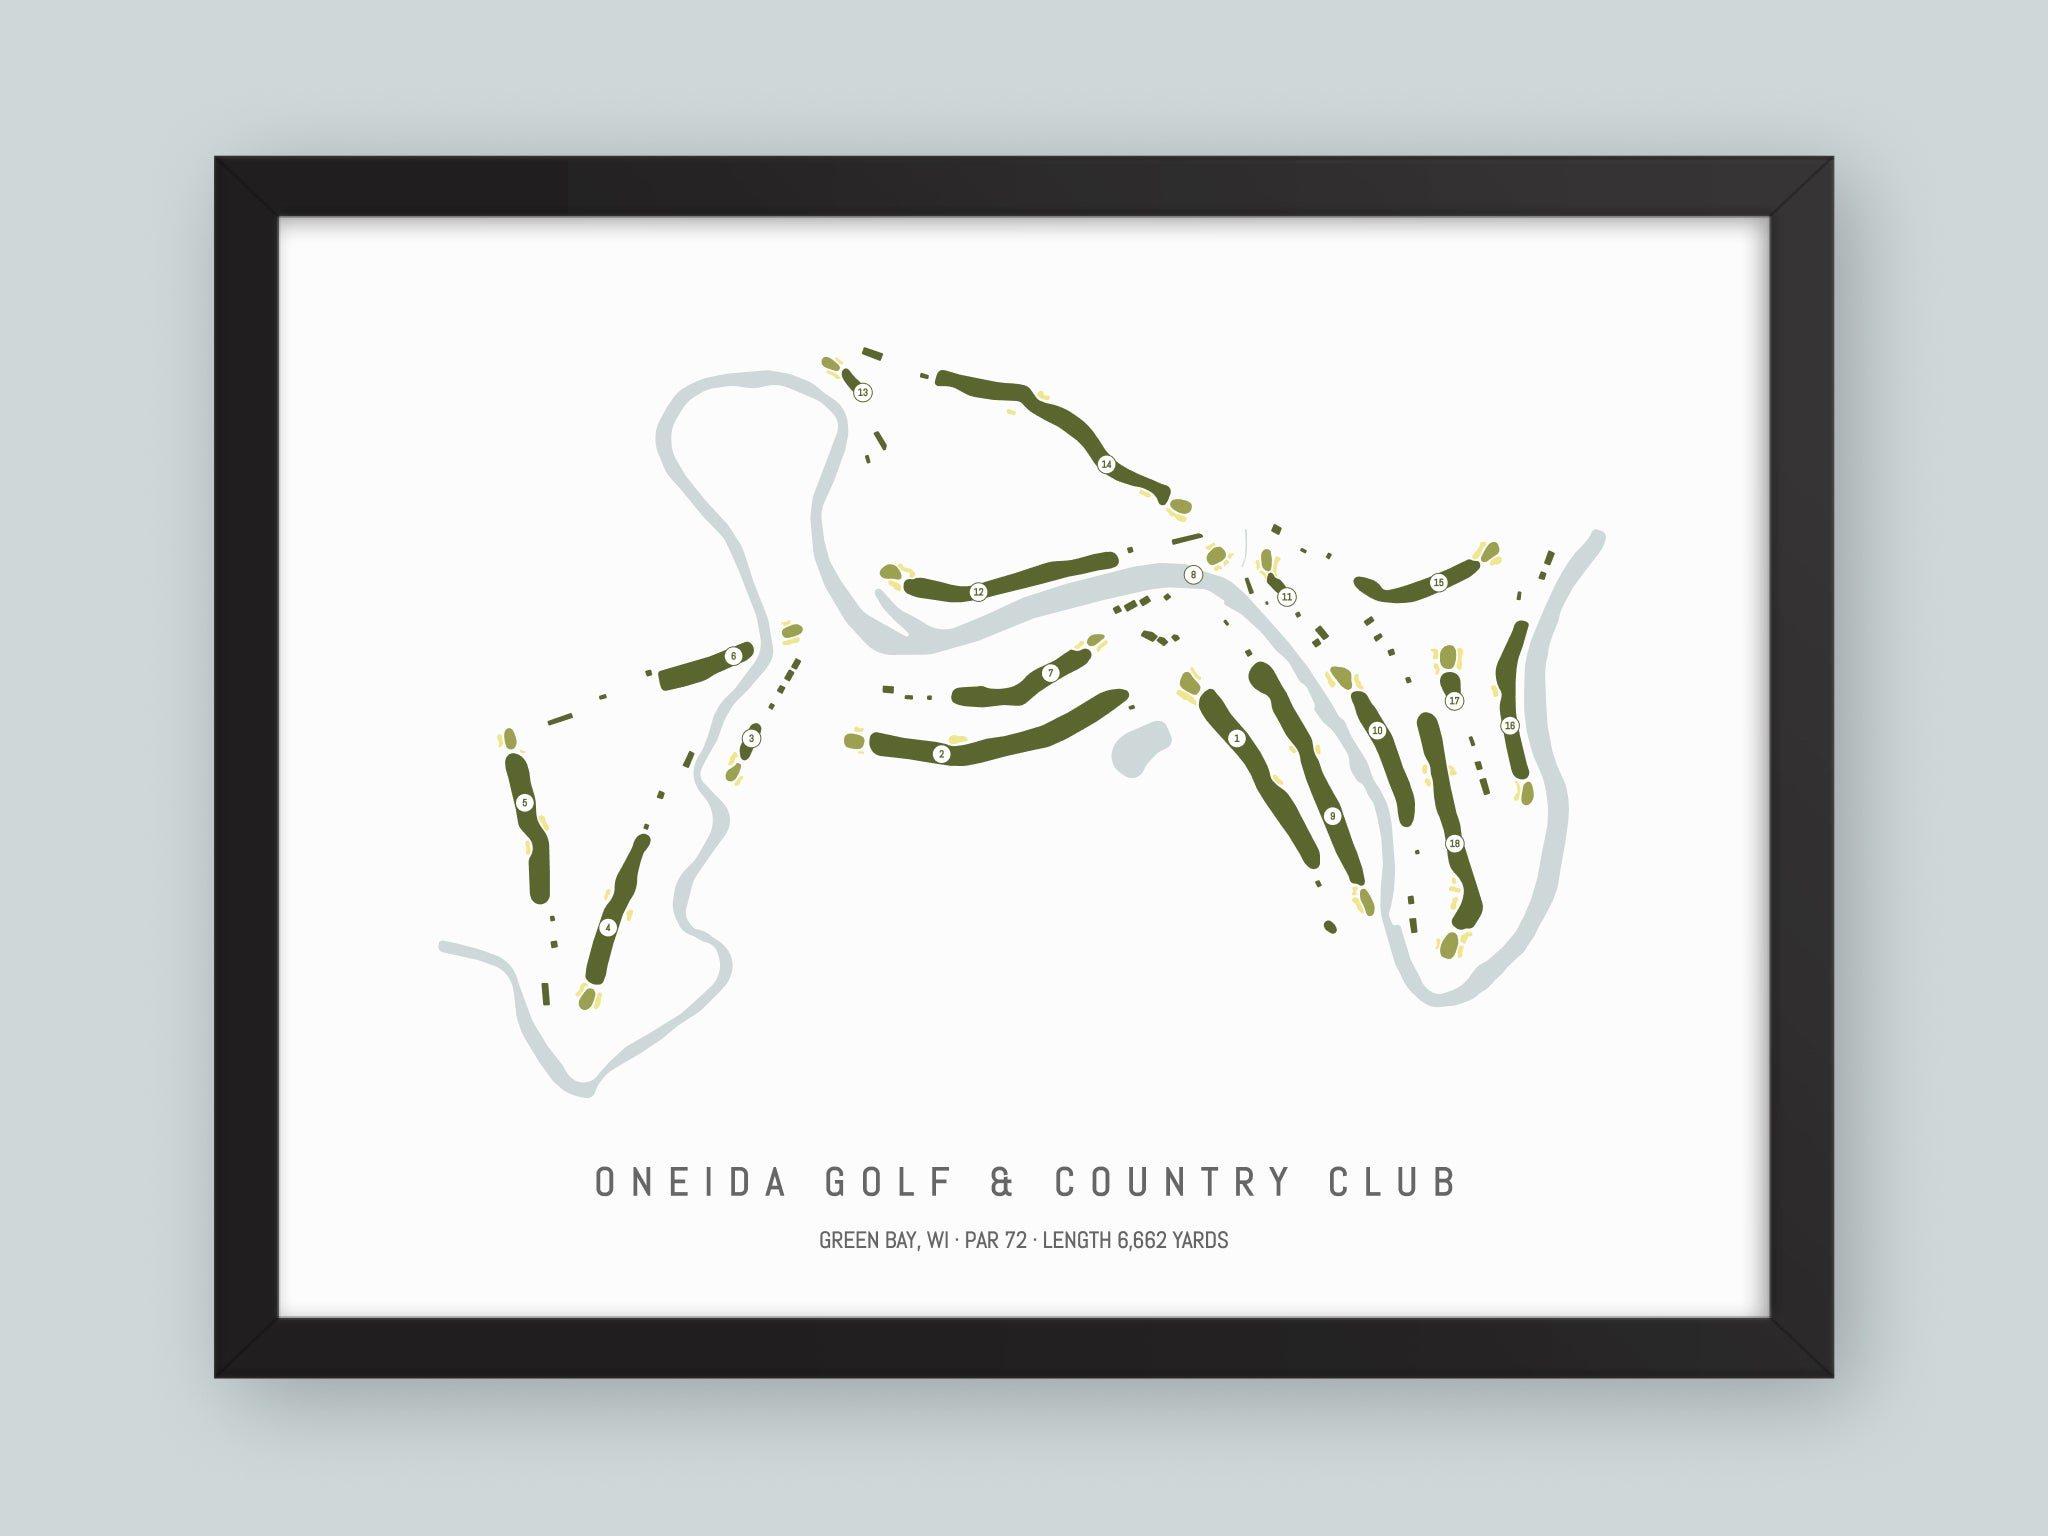 Oneida-Golf-And-Country-Club-WI--Black-Frame-24x18-With-Hole-Numbers